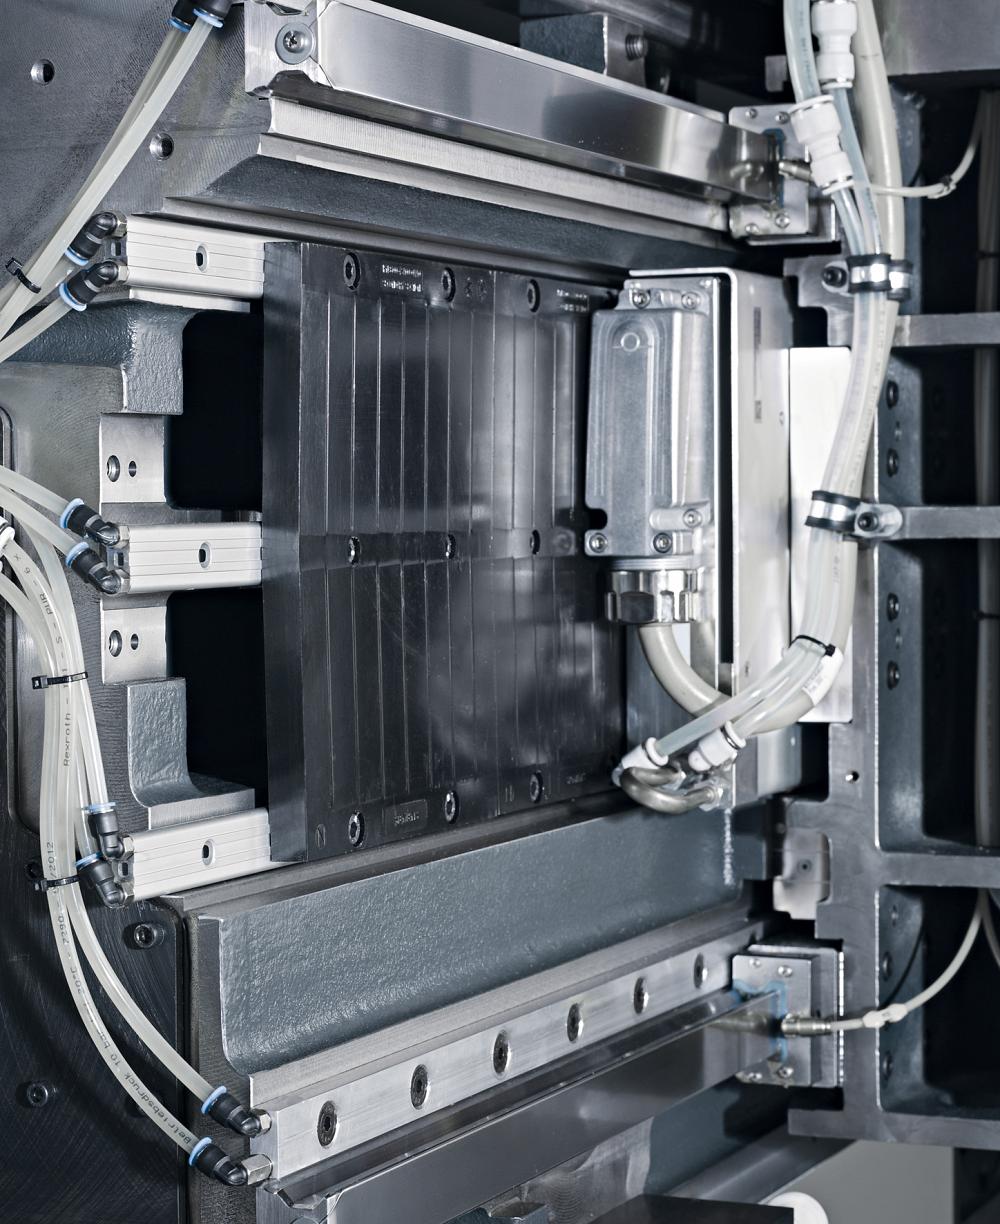 Direct drives create high dynamics in the machine and precise, long-term accuracy.